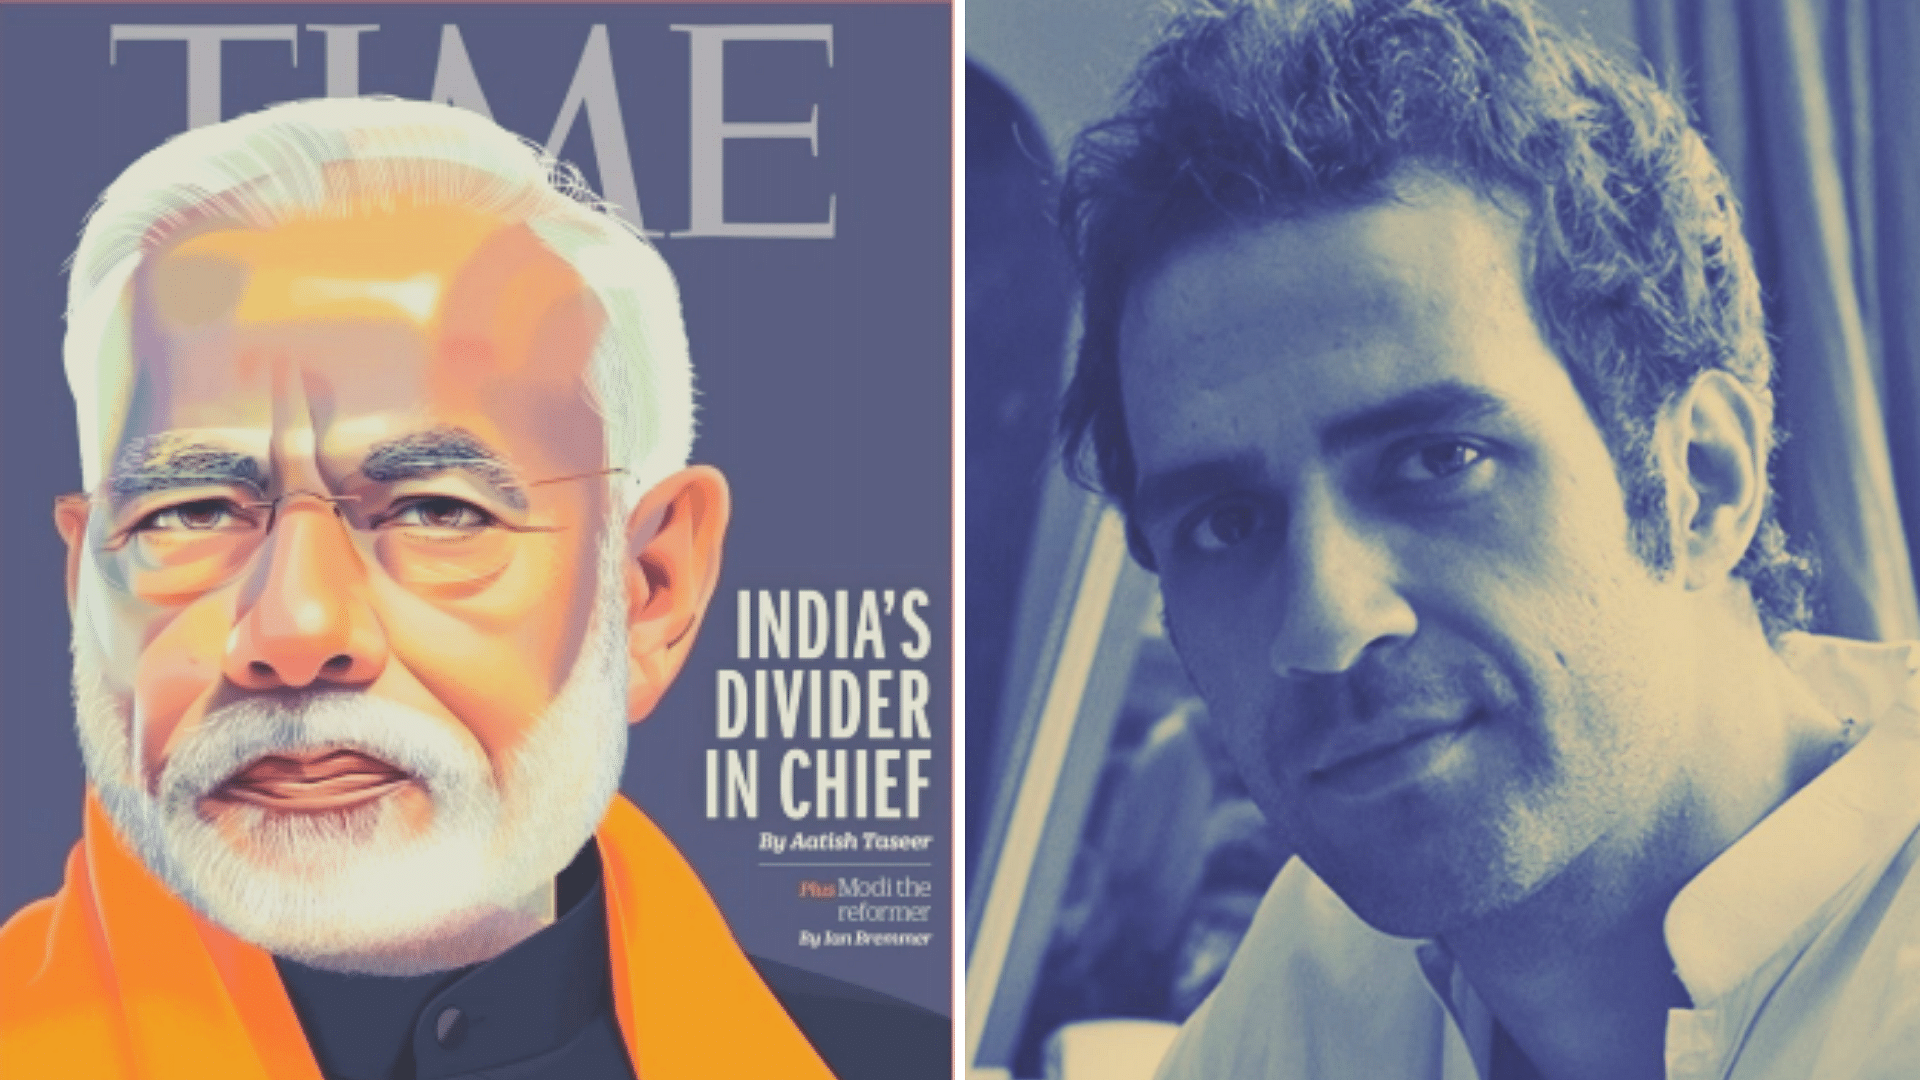 Aatish Taseer (R)is the author of the controversial <i>TIME magazine</i> essay, ‘India’s Divider In Chief’ (L).